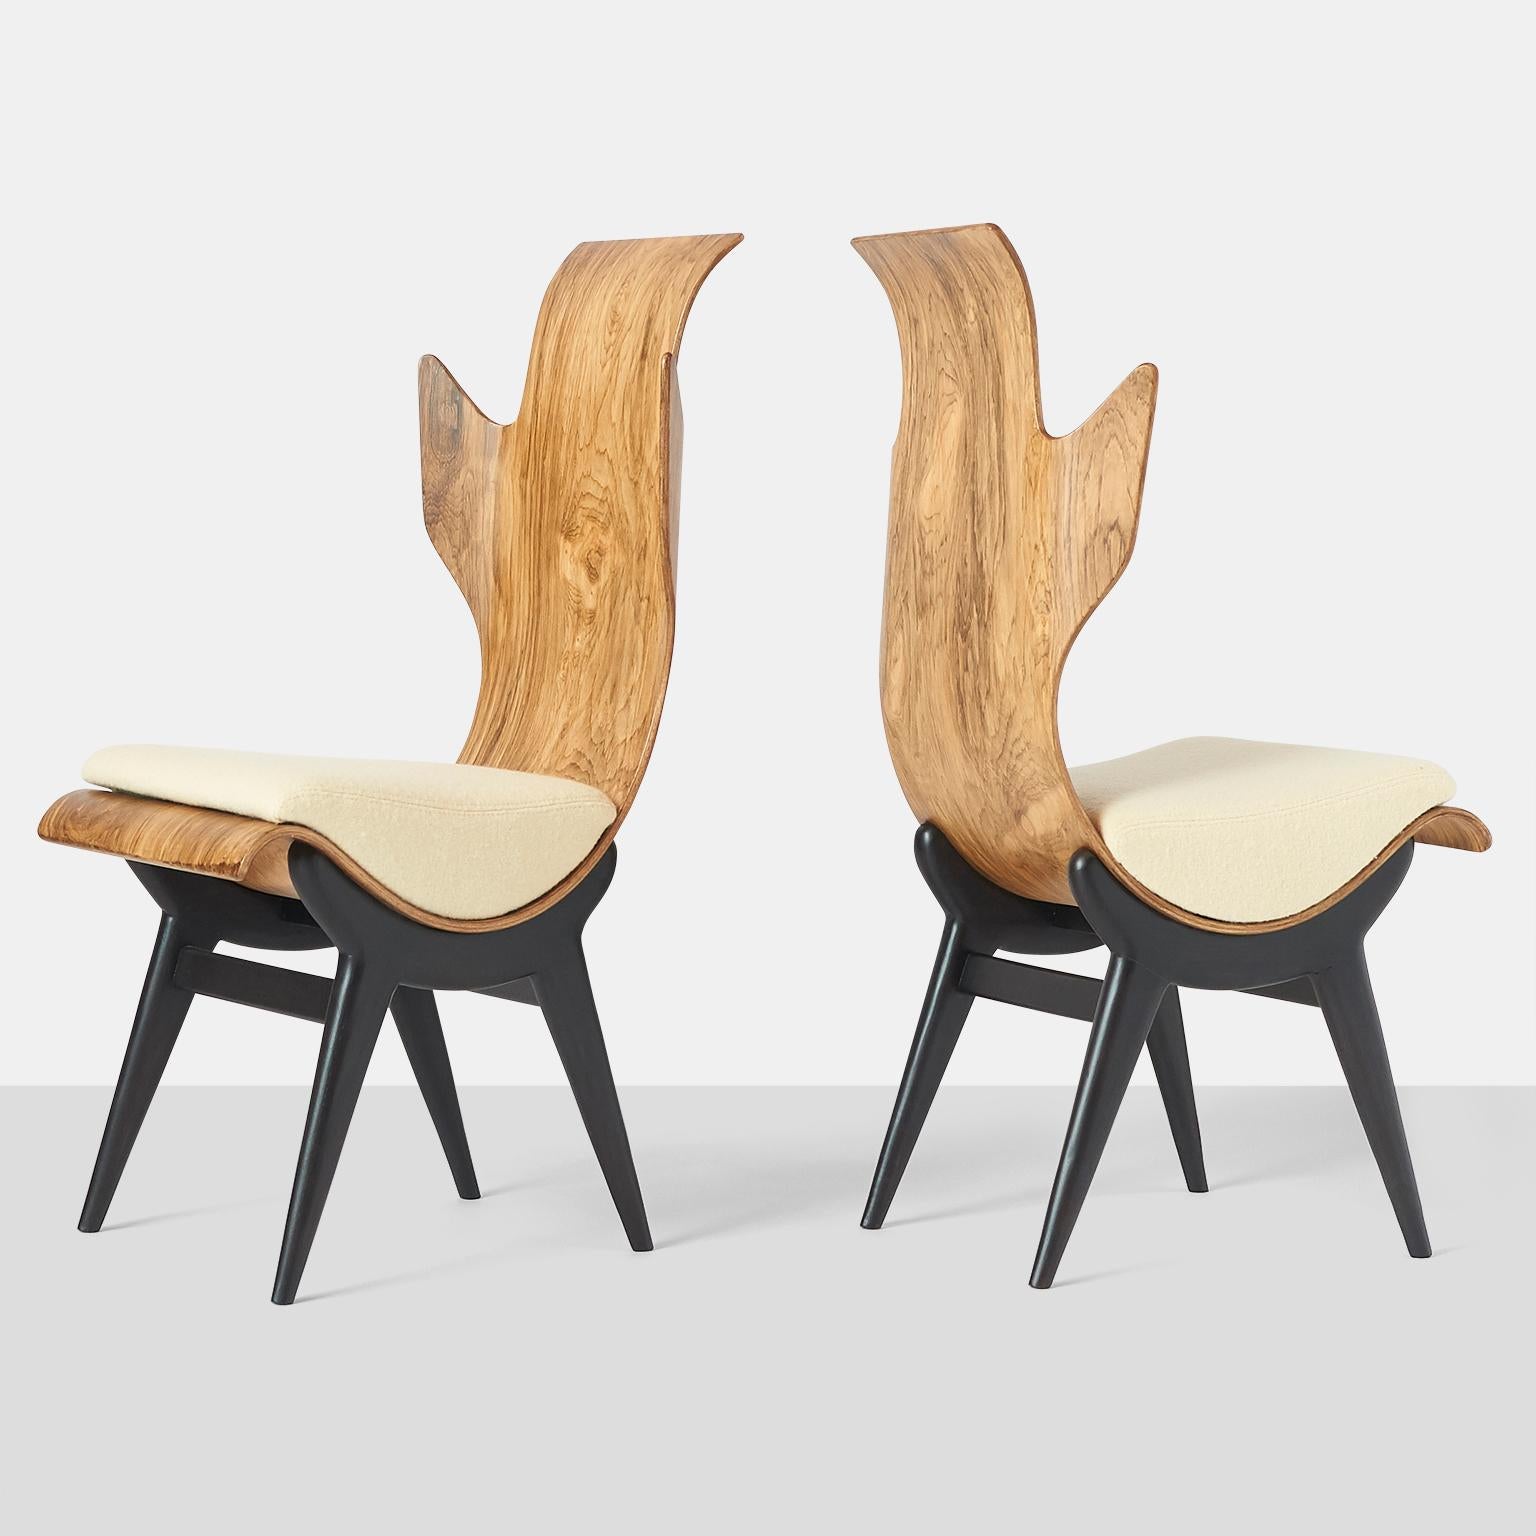 A pair of very rare and sculptural Pozzi & Verga model ‘2/R’ or 'Flame' chairs, designed by Dante LaTorre. The chairs are made of bent, laminated rosewood on an ebonized ash frame. They have fixed cushions with a ivory boiled wool upholstery. The